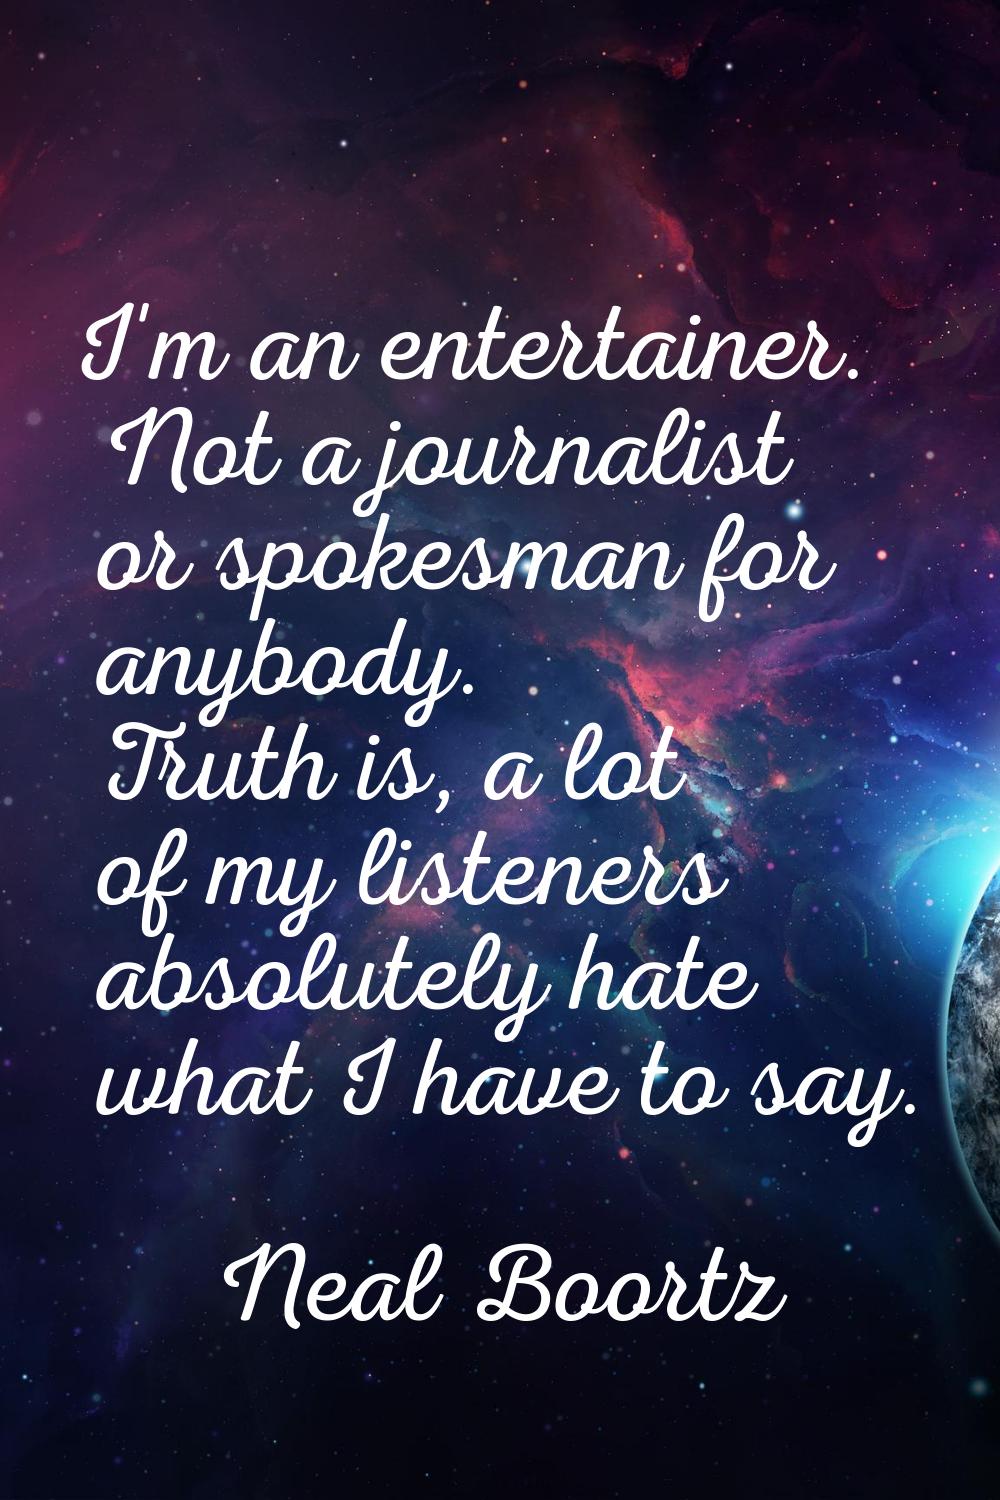 I'm an entertainer. Not a journalist or spokesman for anybody. Truth is, a lot of my listeners abso